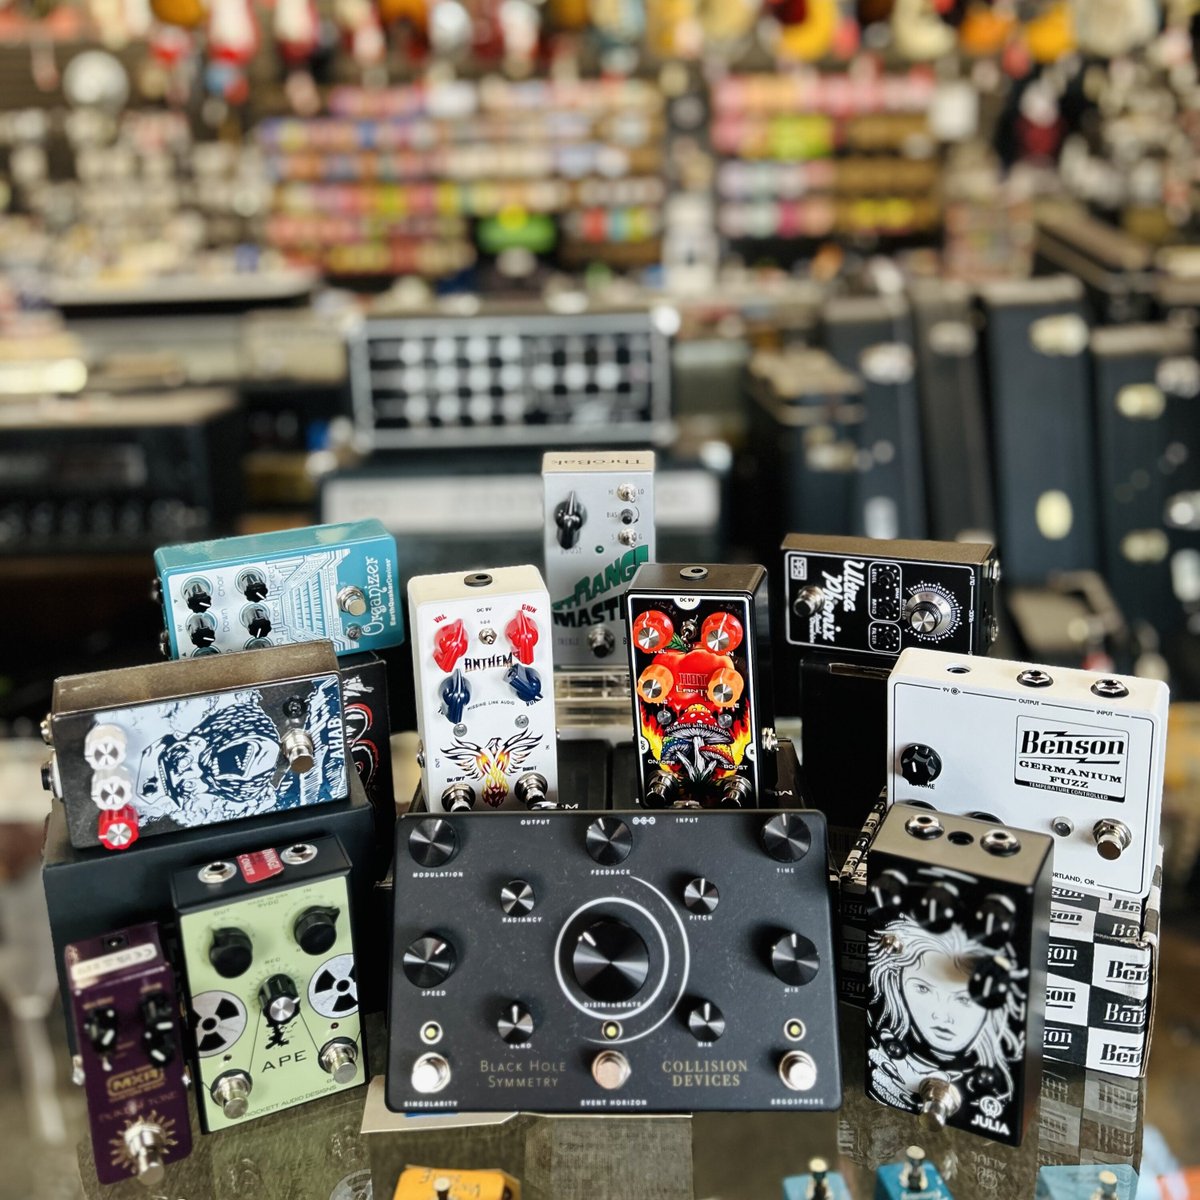 Here's a smattering of Fresh Used Pedals! (not yet on our website) So Stop in to check em out!!
#effectspedals #stompbox #Benson #Earthquakerdevices #jrockettaudio #CollisionDevices #WalrusAudio